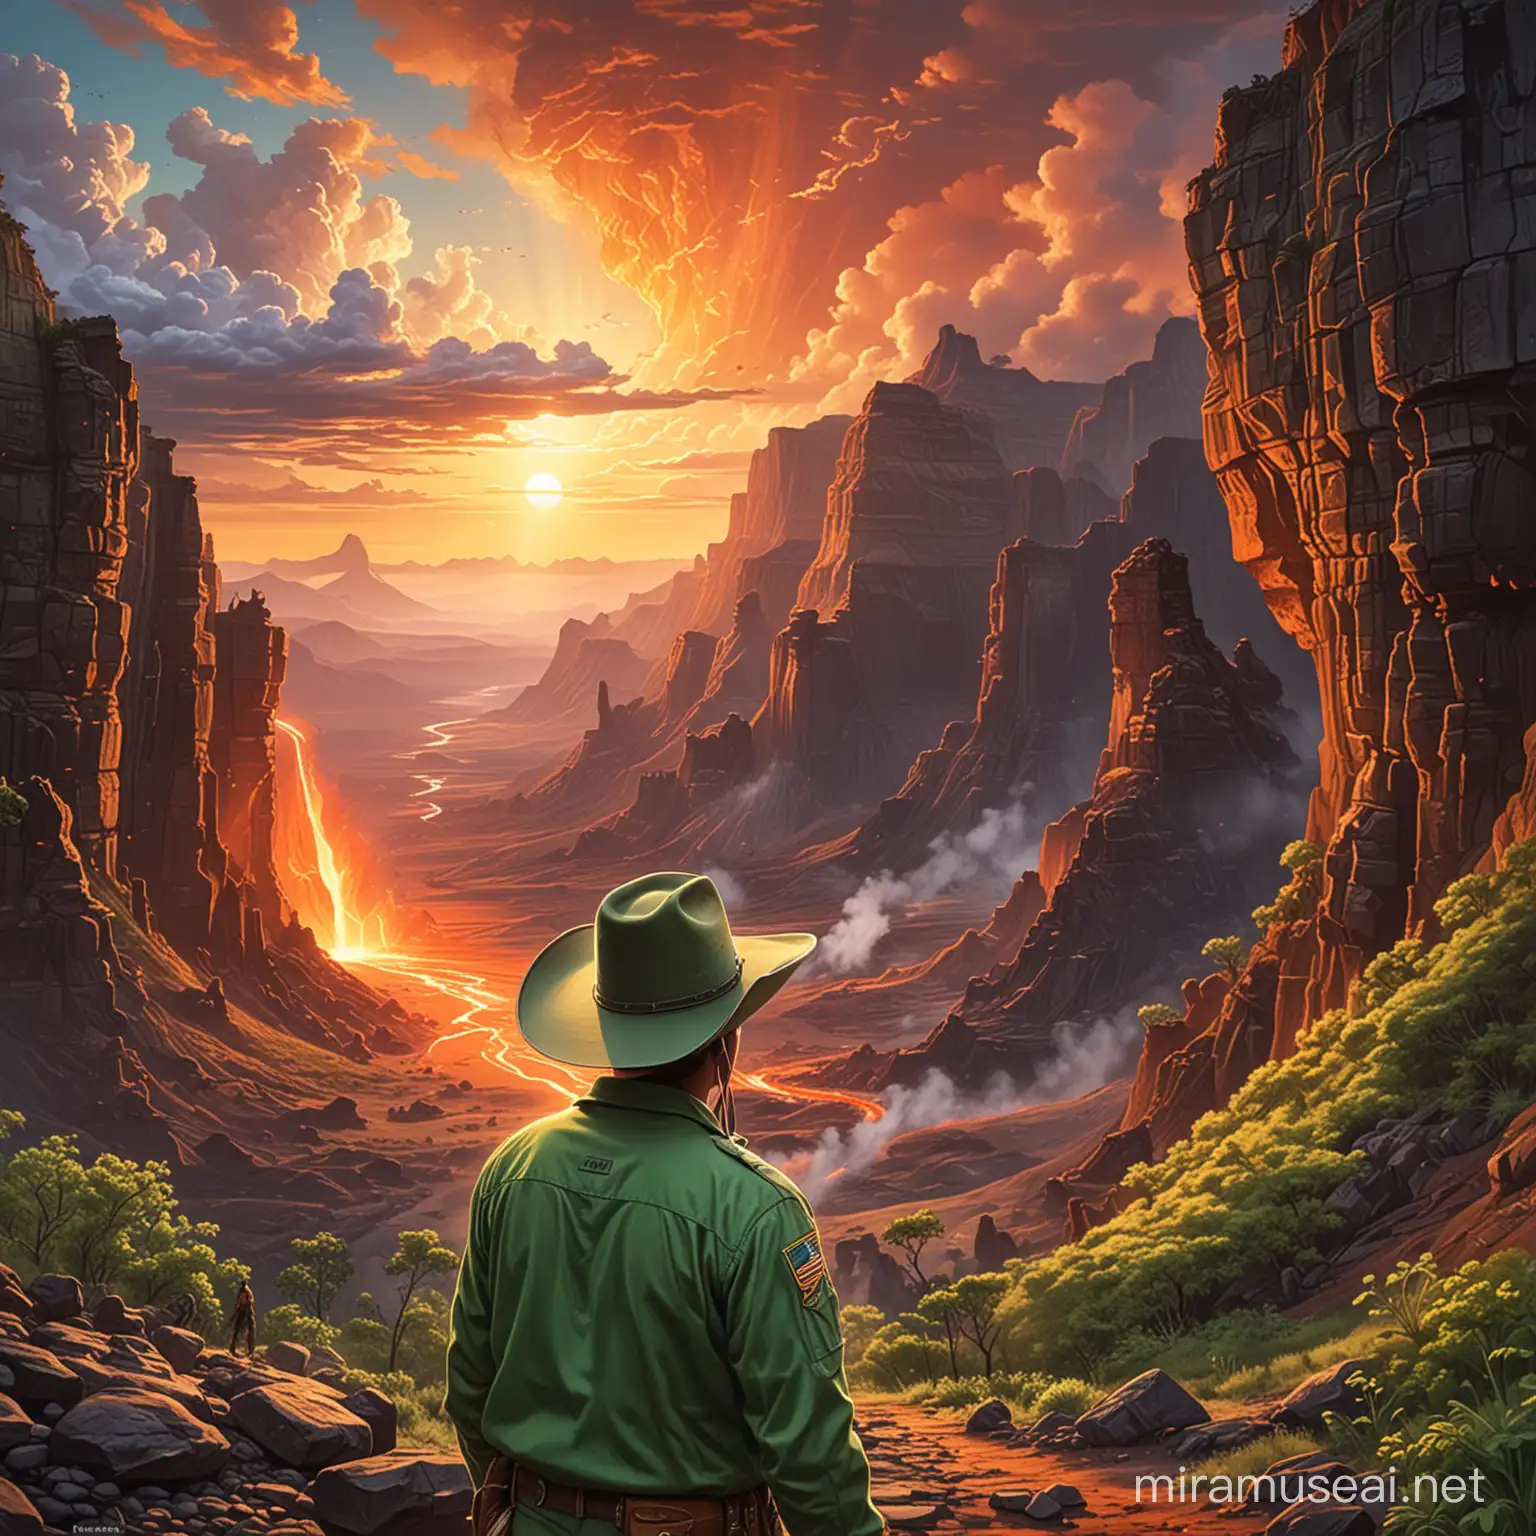 The image is a drawing of a person wearing a green uniform. The person is depicted with various hats such as a cowboy hat, fedora, and sun hat. The drawing is a cartoon illustration of a man in different headgear.The image shows a large canyon with a light shining through it. The tags associated with the image include sky, nature, cloud, volcano, heat, outdoor, fissure vent, lava, ground, eruption, mountain, and sunset.